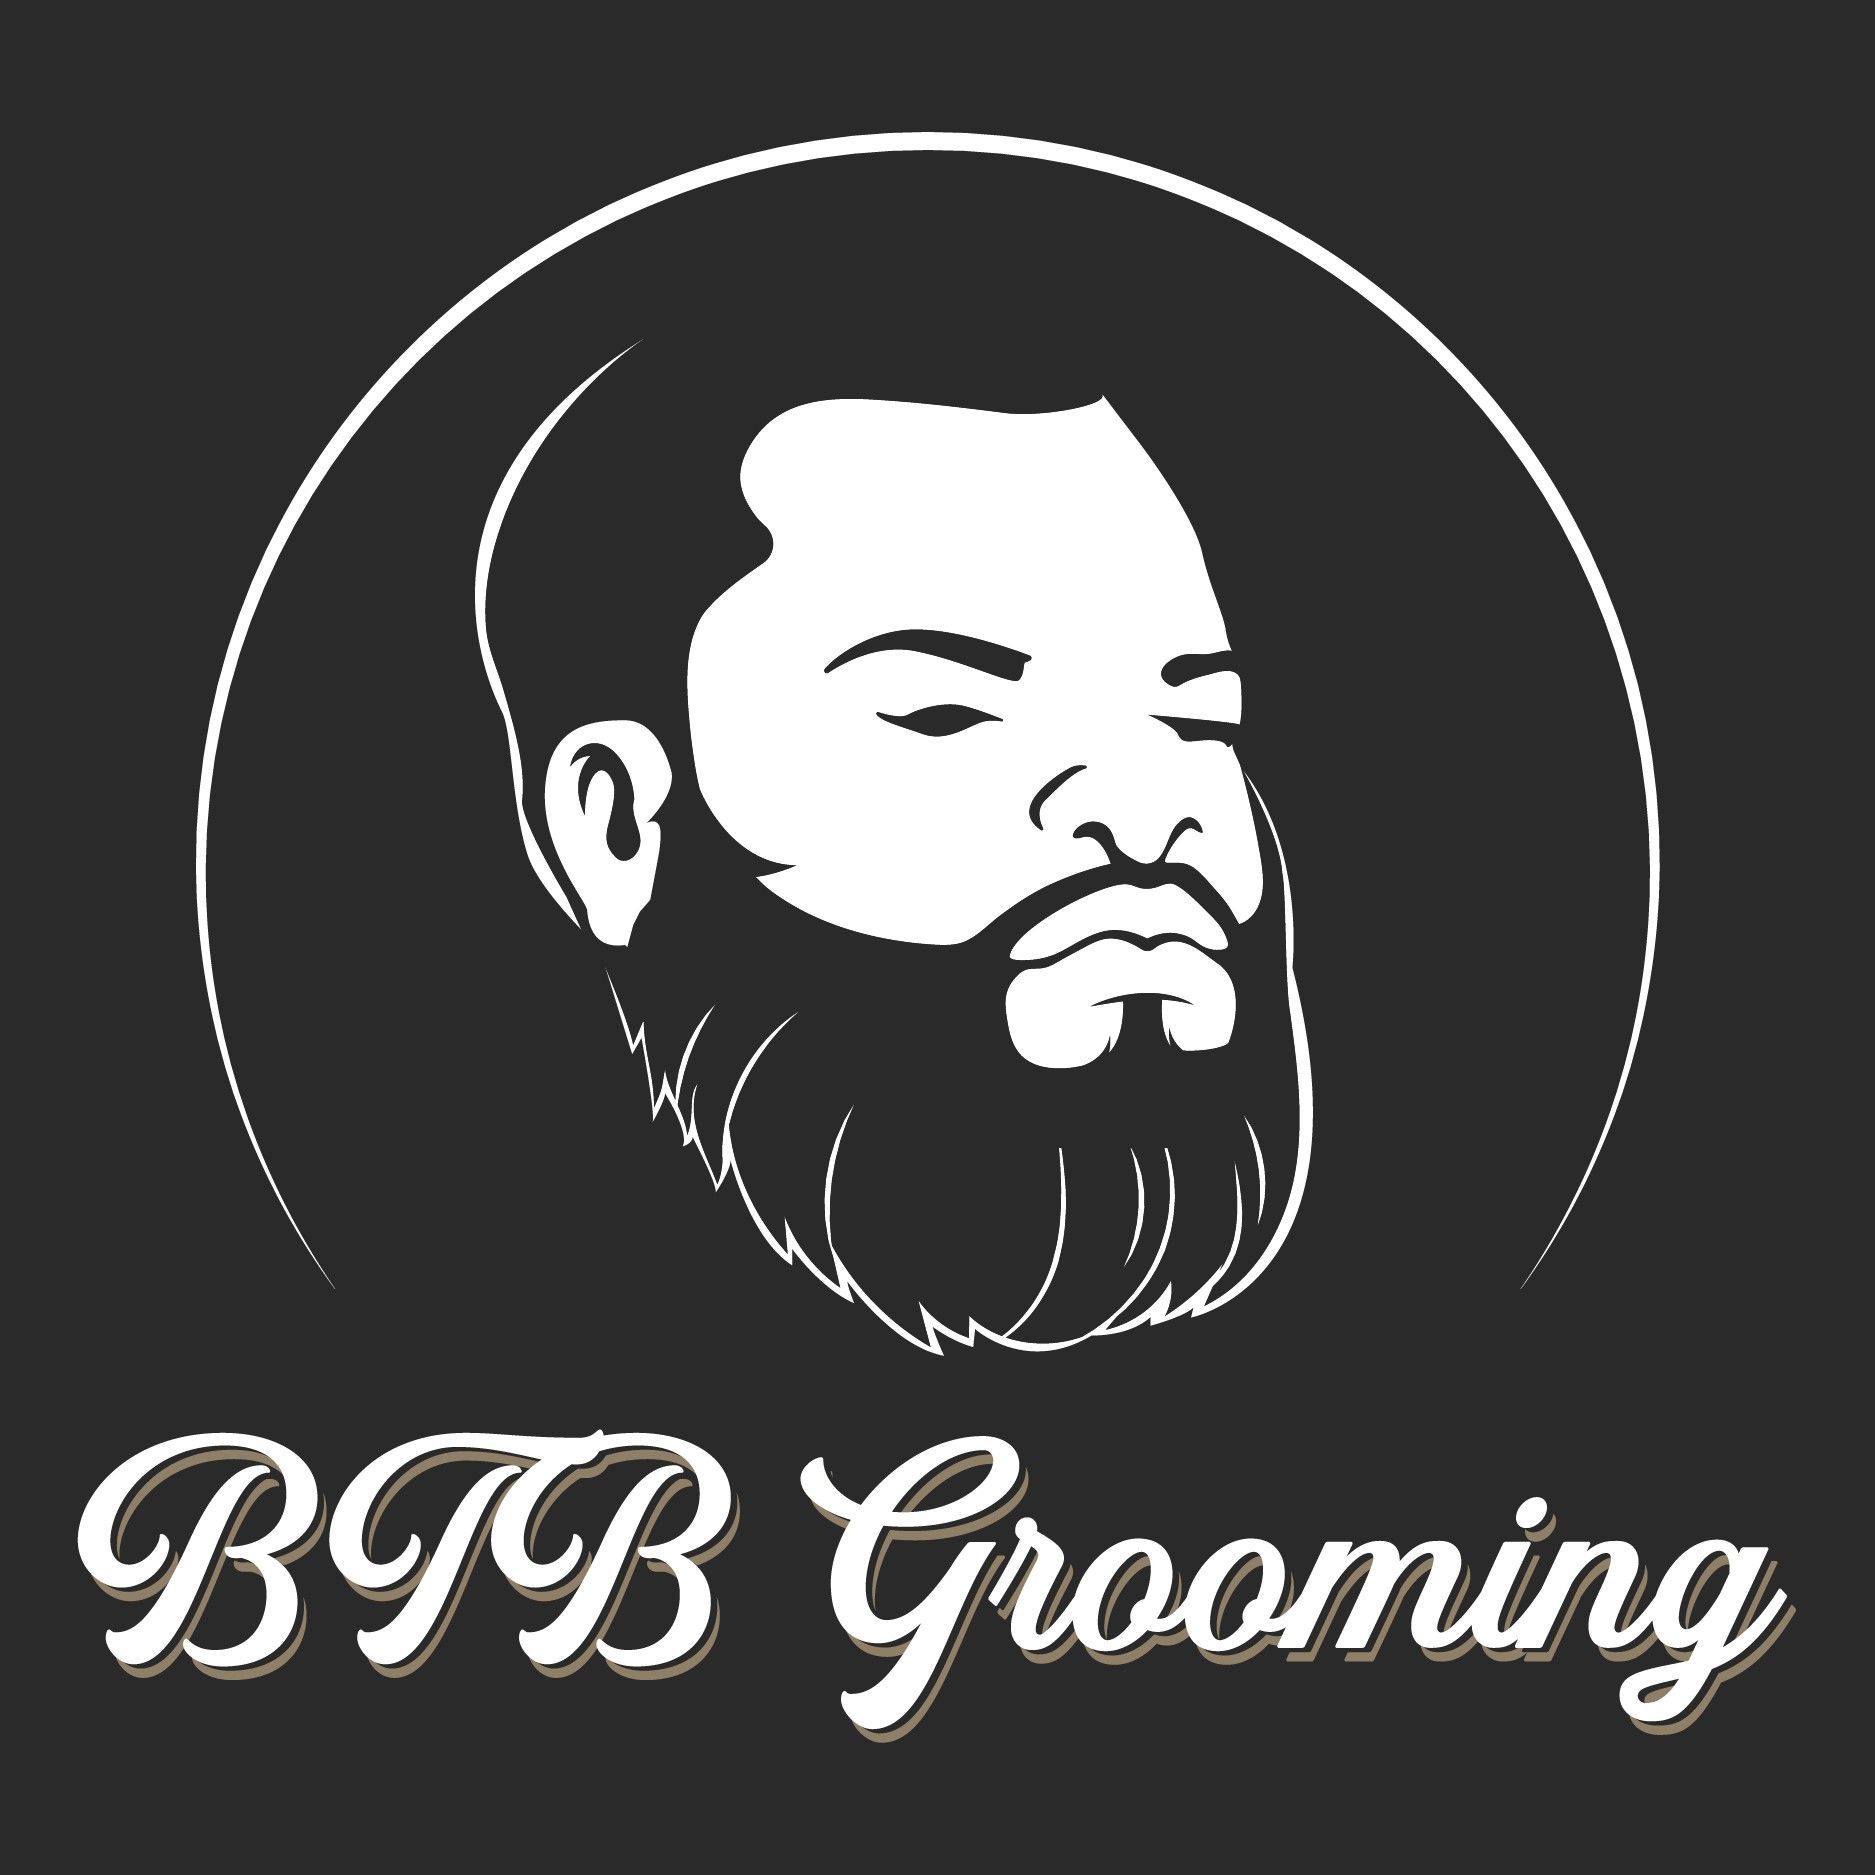 Brandon The Barber (BTB Grooming), 3338 N. Emerson Ave, Indianapolis, 46218